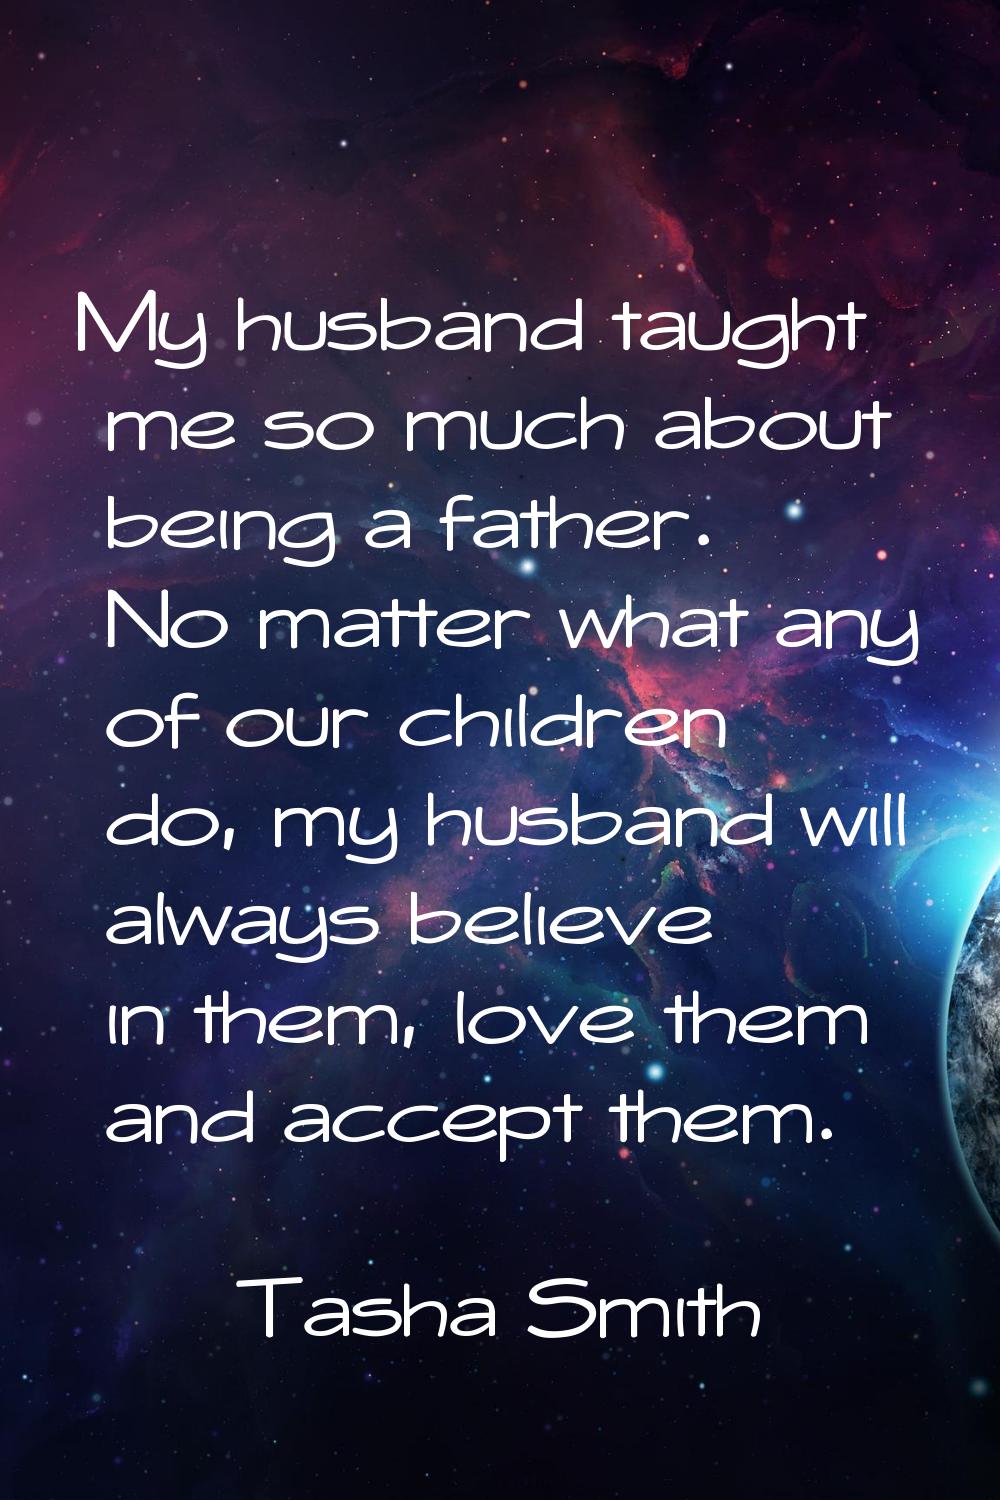 My husband taught me so much about being a father. No matter what any of our children do, my husban